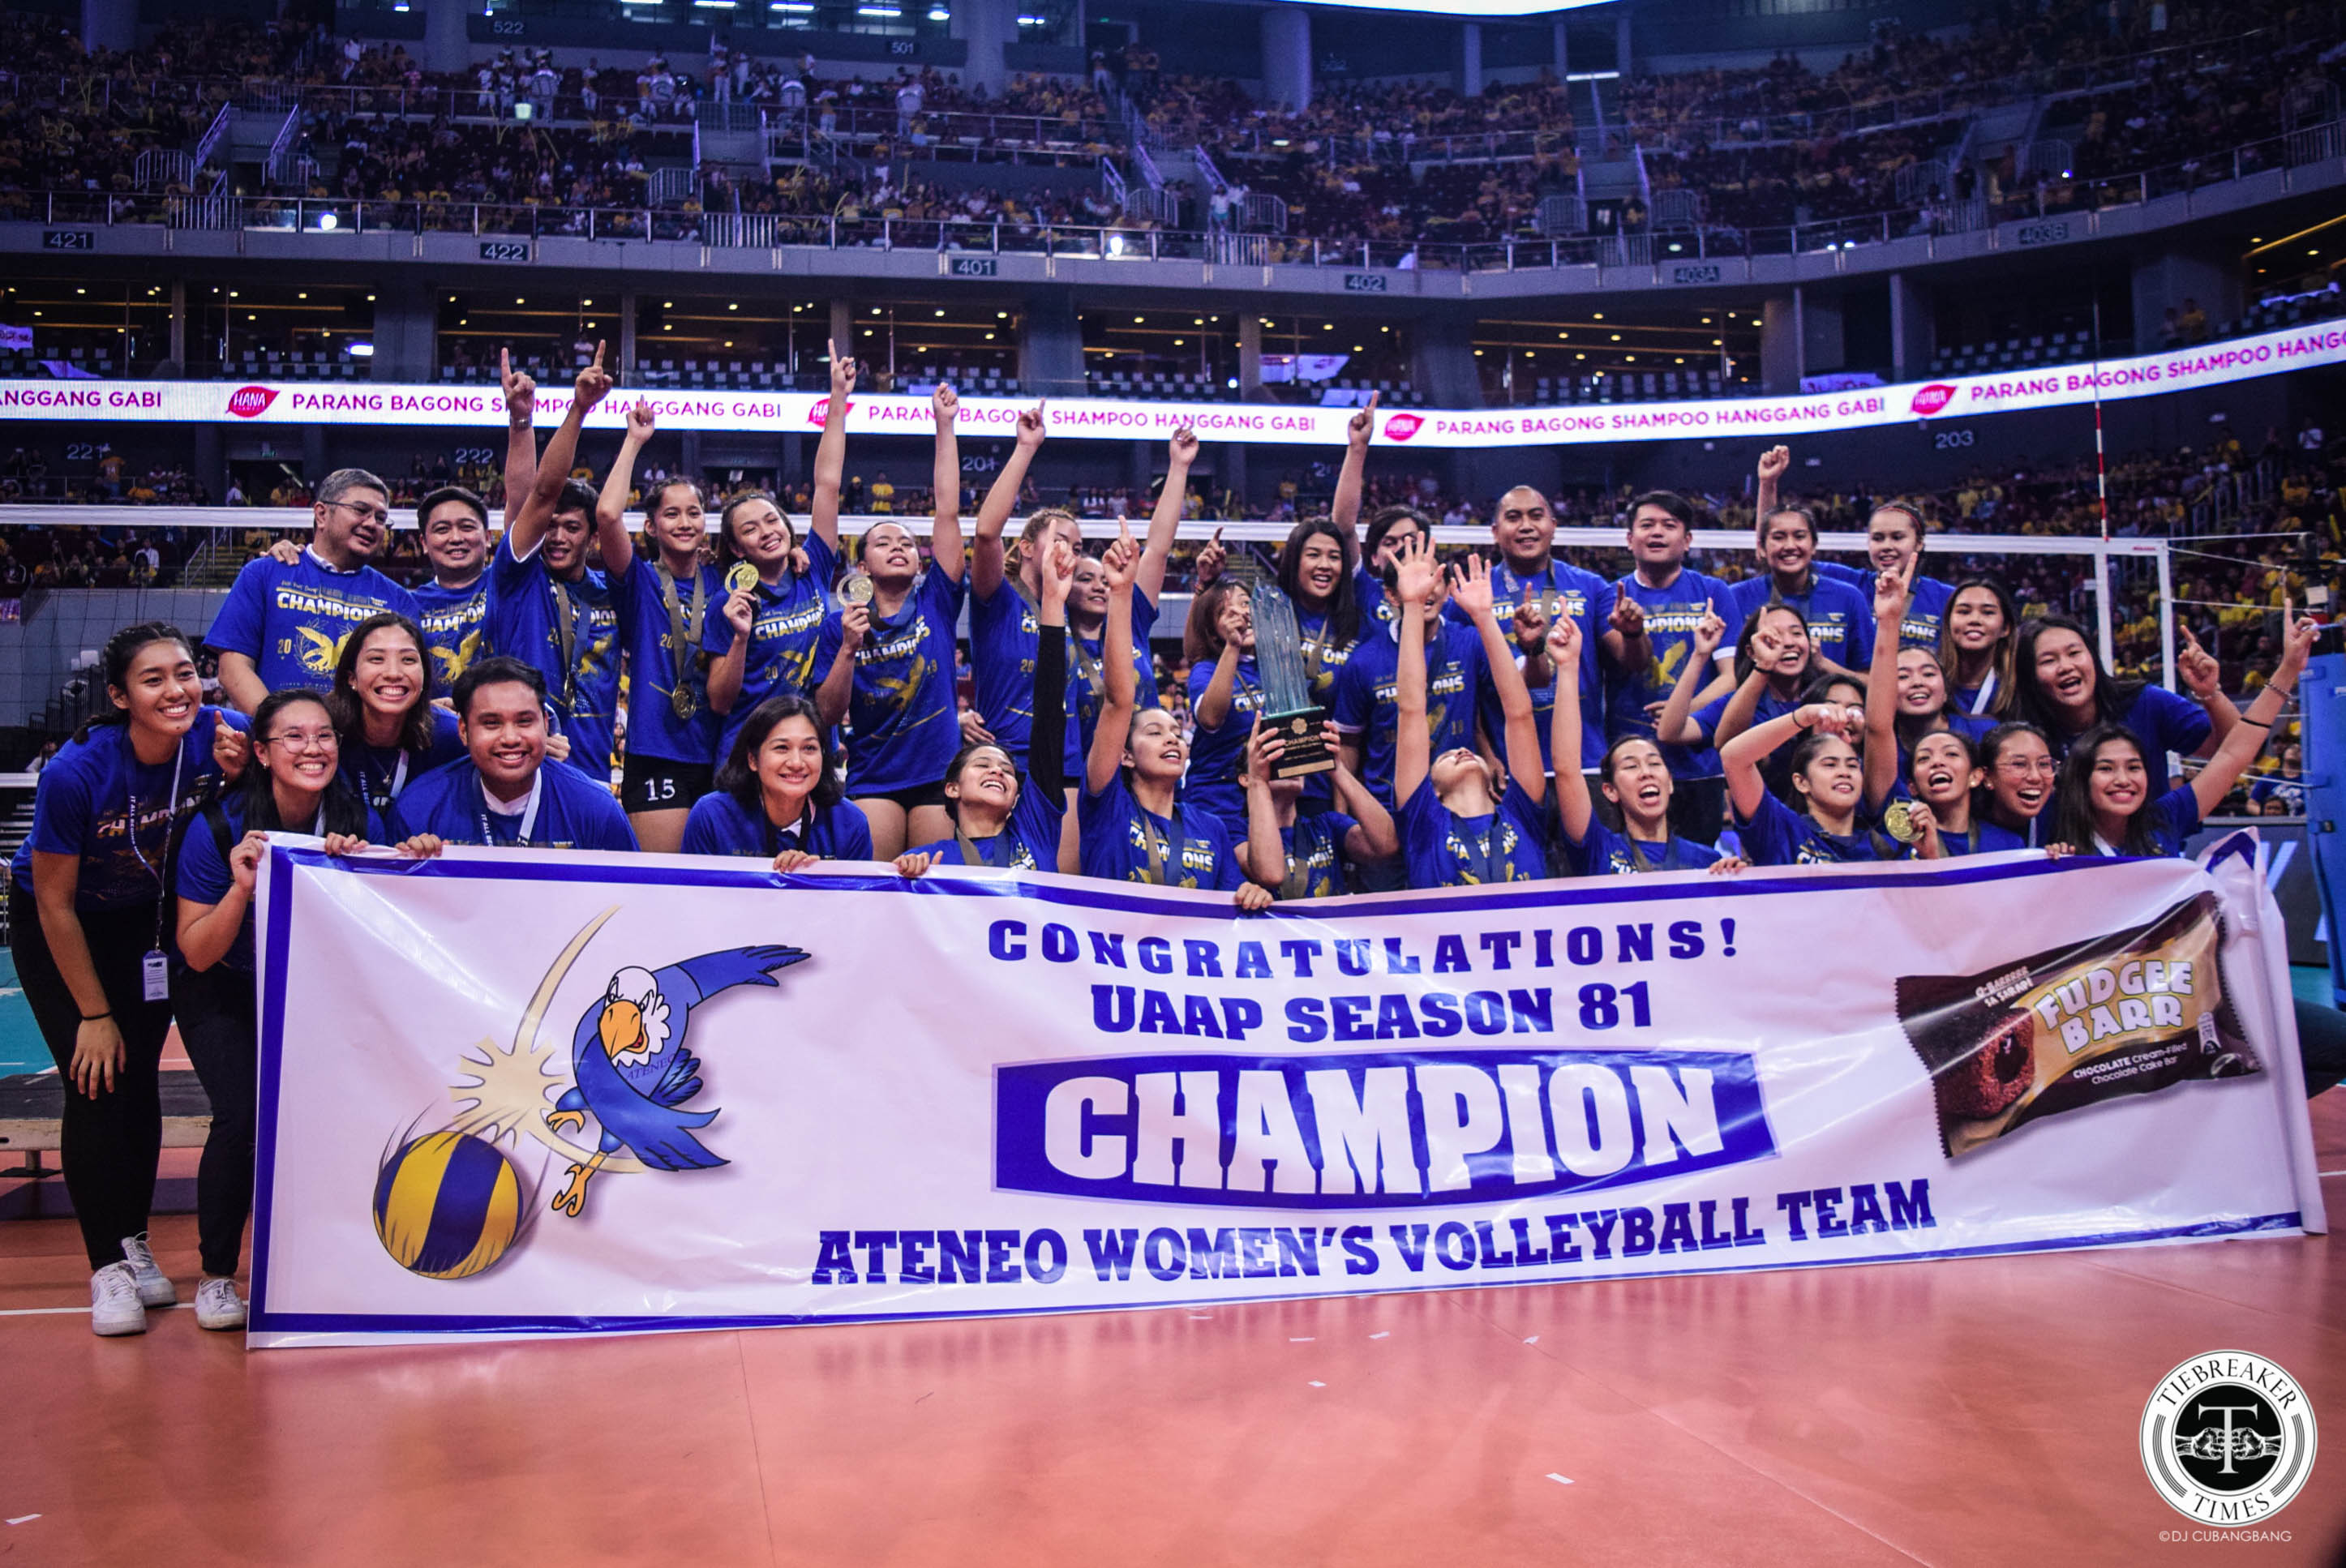 UAAP-Season-81-Womens-Volleyball-Finals-Game-3-ADMU-def-UST-champions-lady-eagles Tolentino siblings made sure to bring glory to Ateneo in final years ADMU Basketball News UAAP Volleyball  - philippine sports news